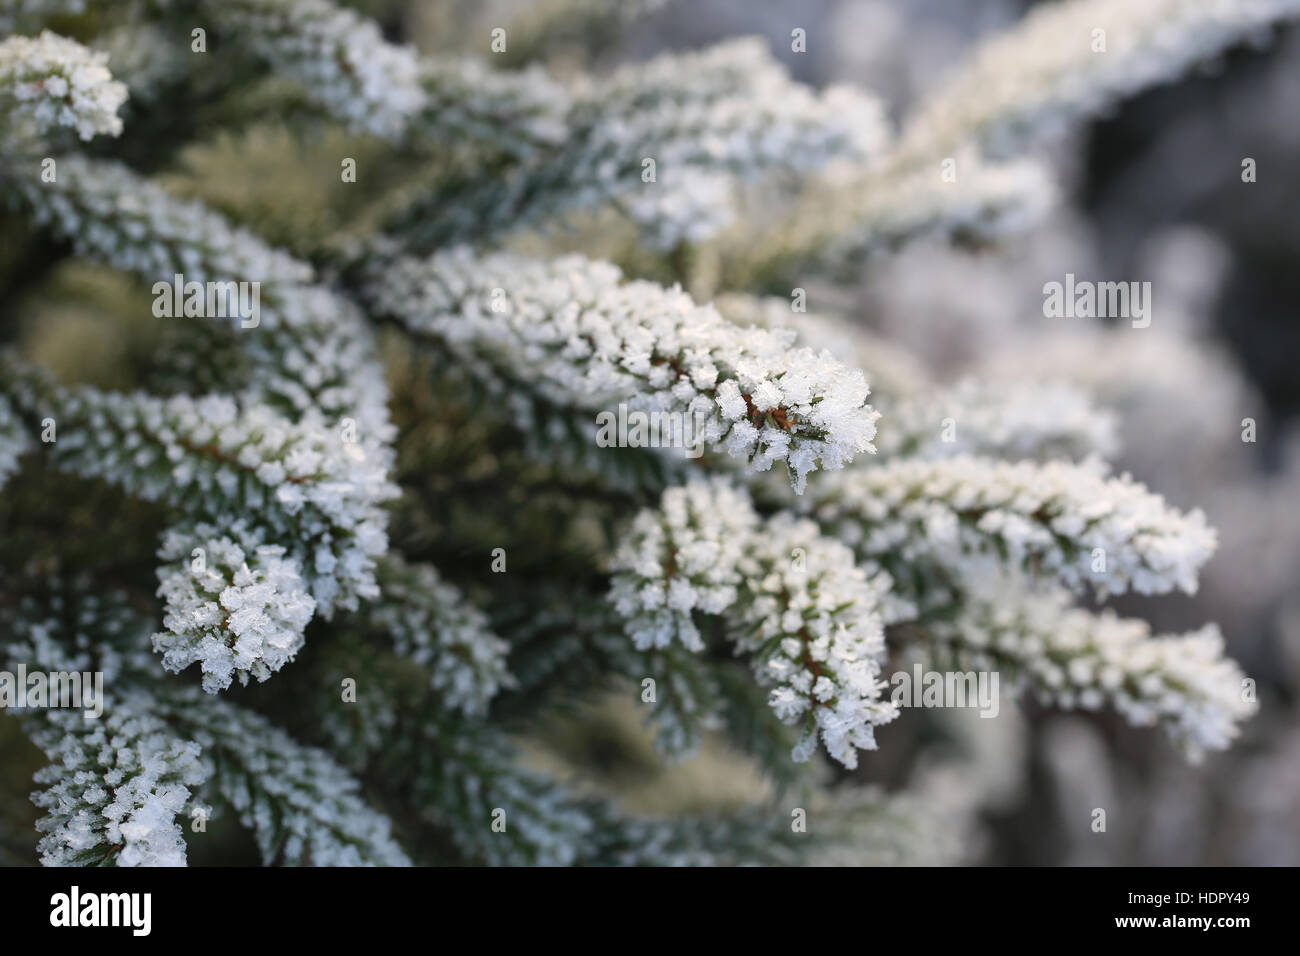 Frost and ice crystals on small fir tree branches close up on a cold day of winter. Shallow depth of field. Stock Photo